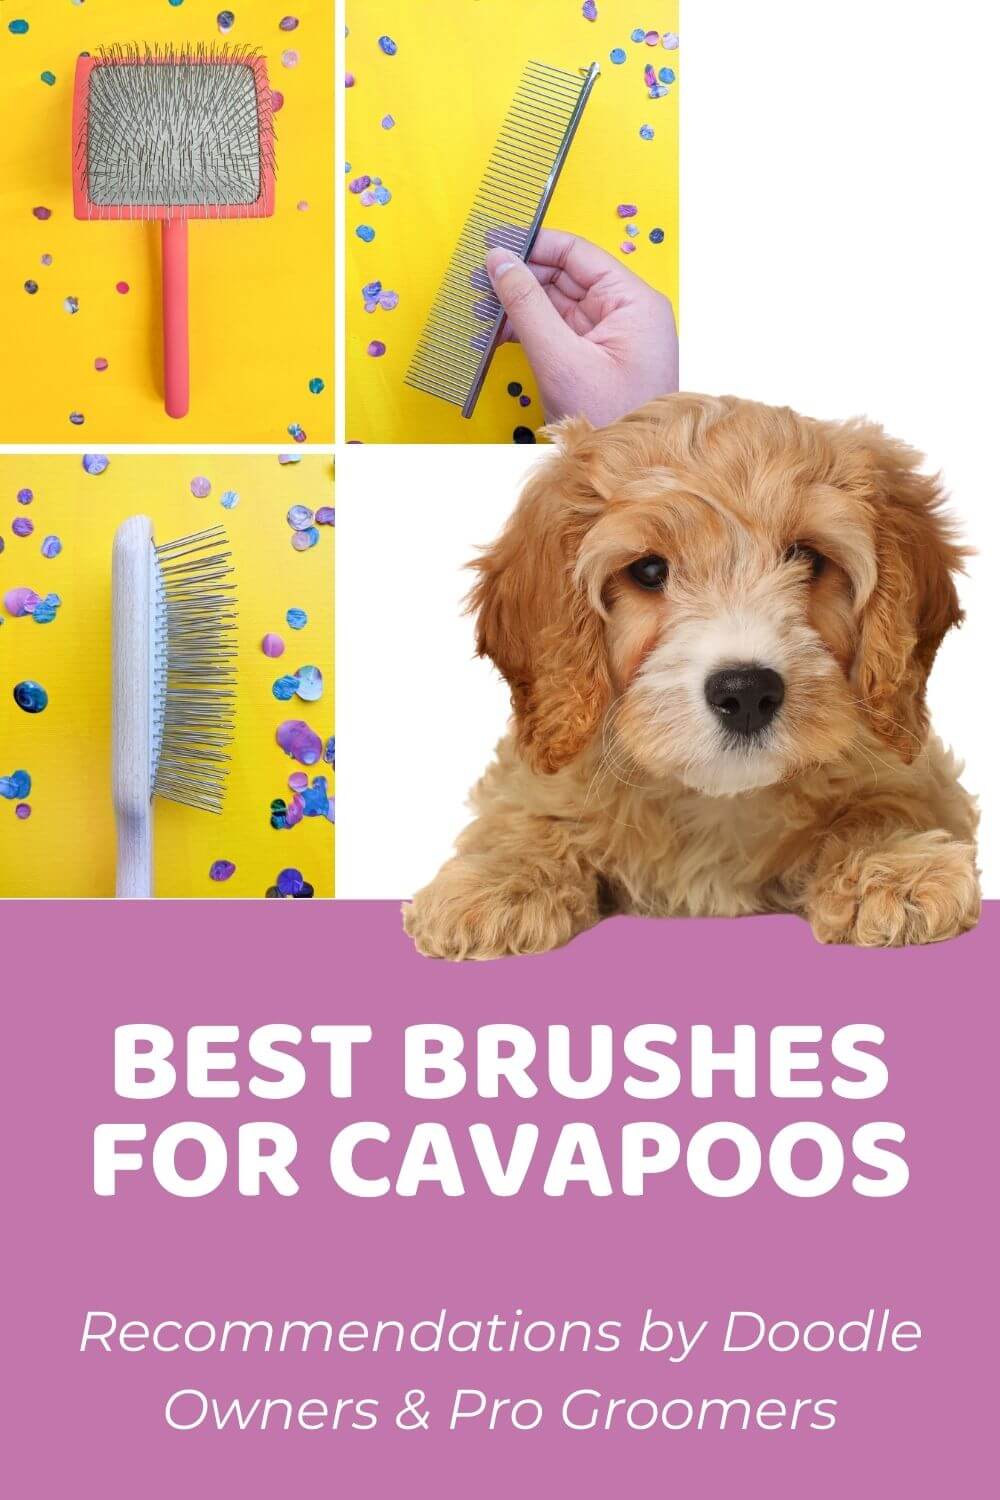 Best Brush for Cavapoo_ Recommendations by Both Doodle Owners and Professional Groomers